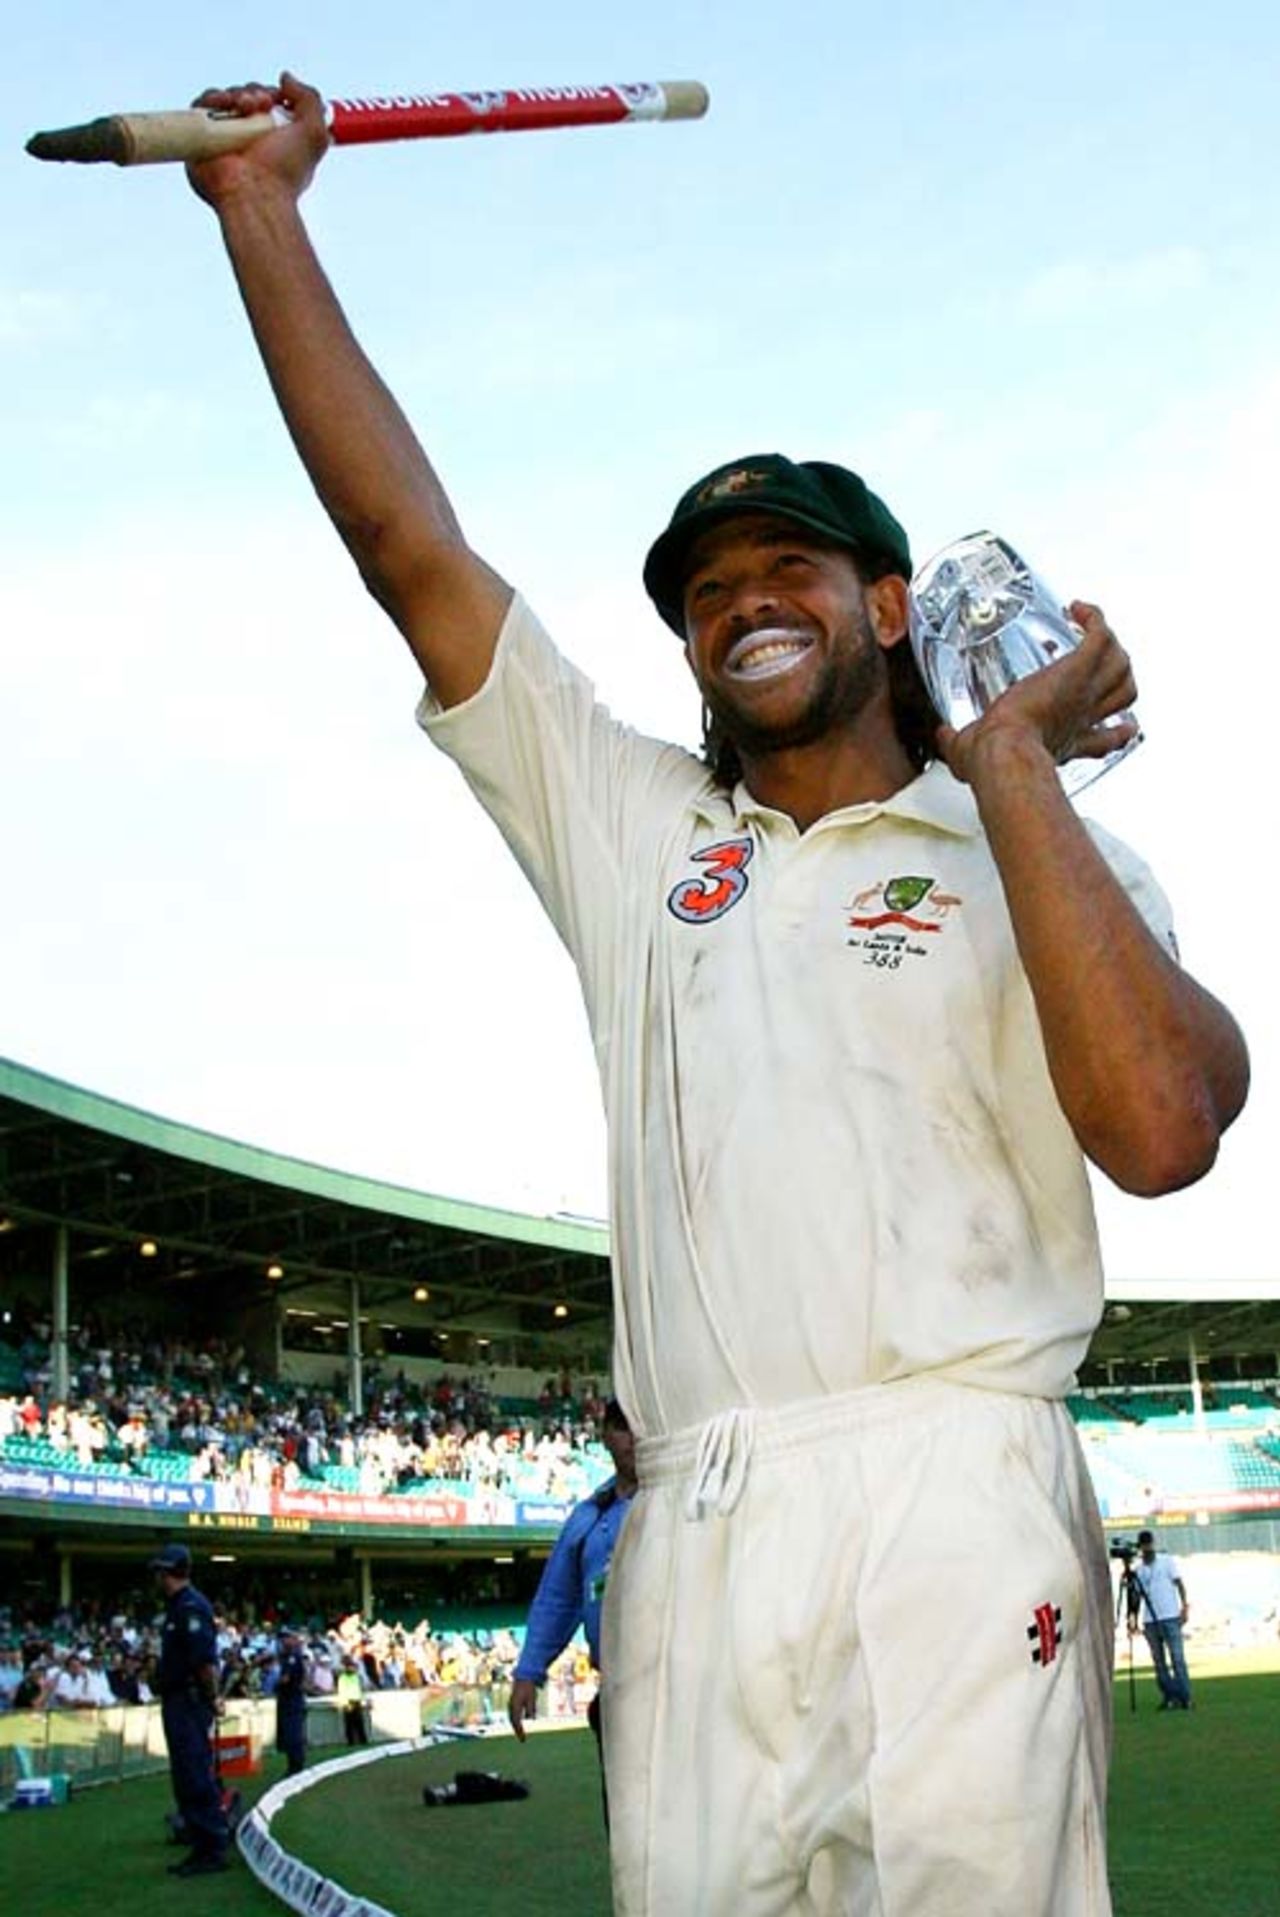 Man-of-the-Match Andrew Symonds waves to the fans, Australia v India, 2nd Test, Sydney, 5th day, January 6, 2008